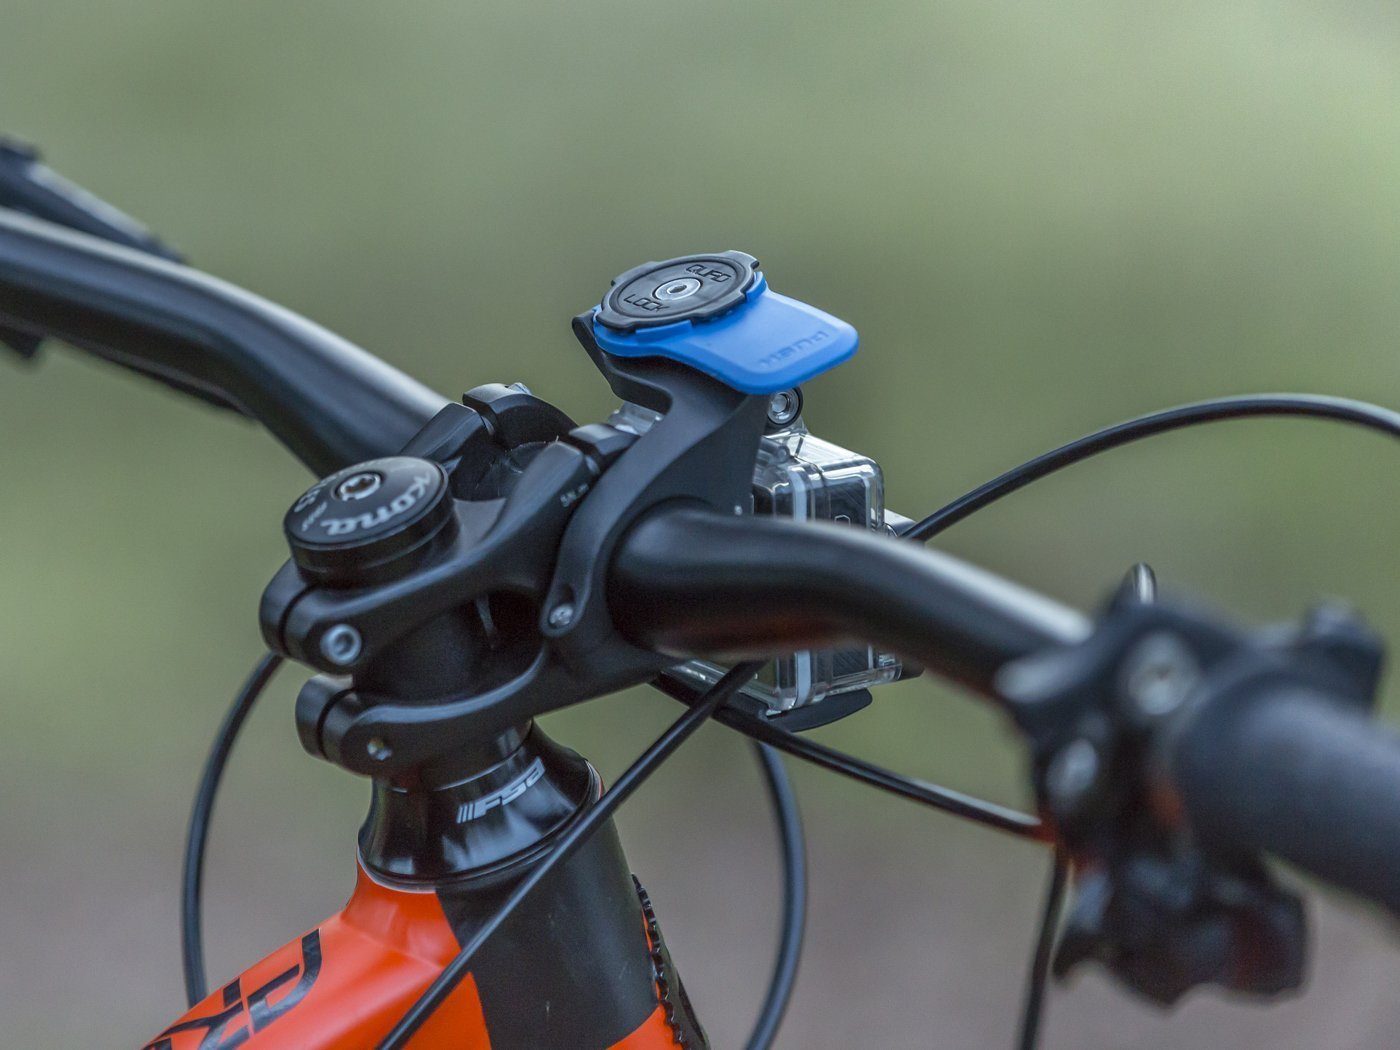 Cycling - Out Front Mount Mounts Quad Lock 